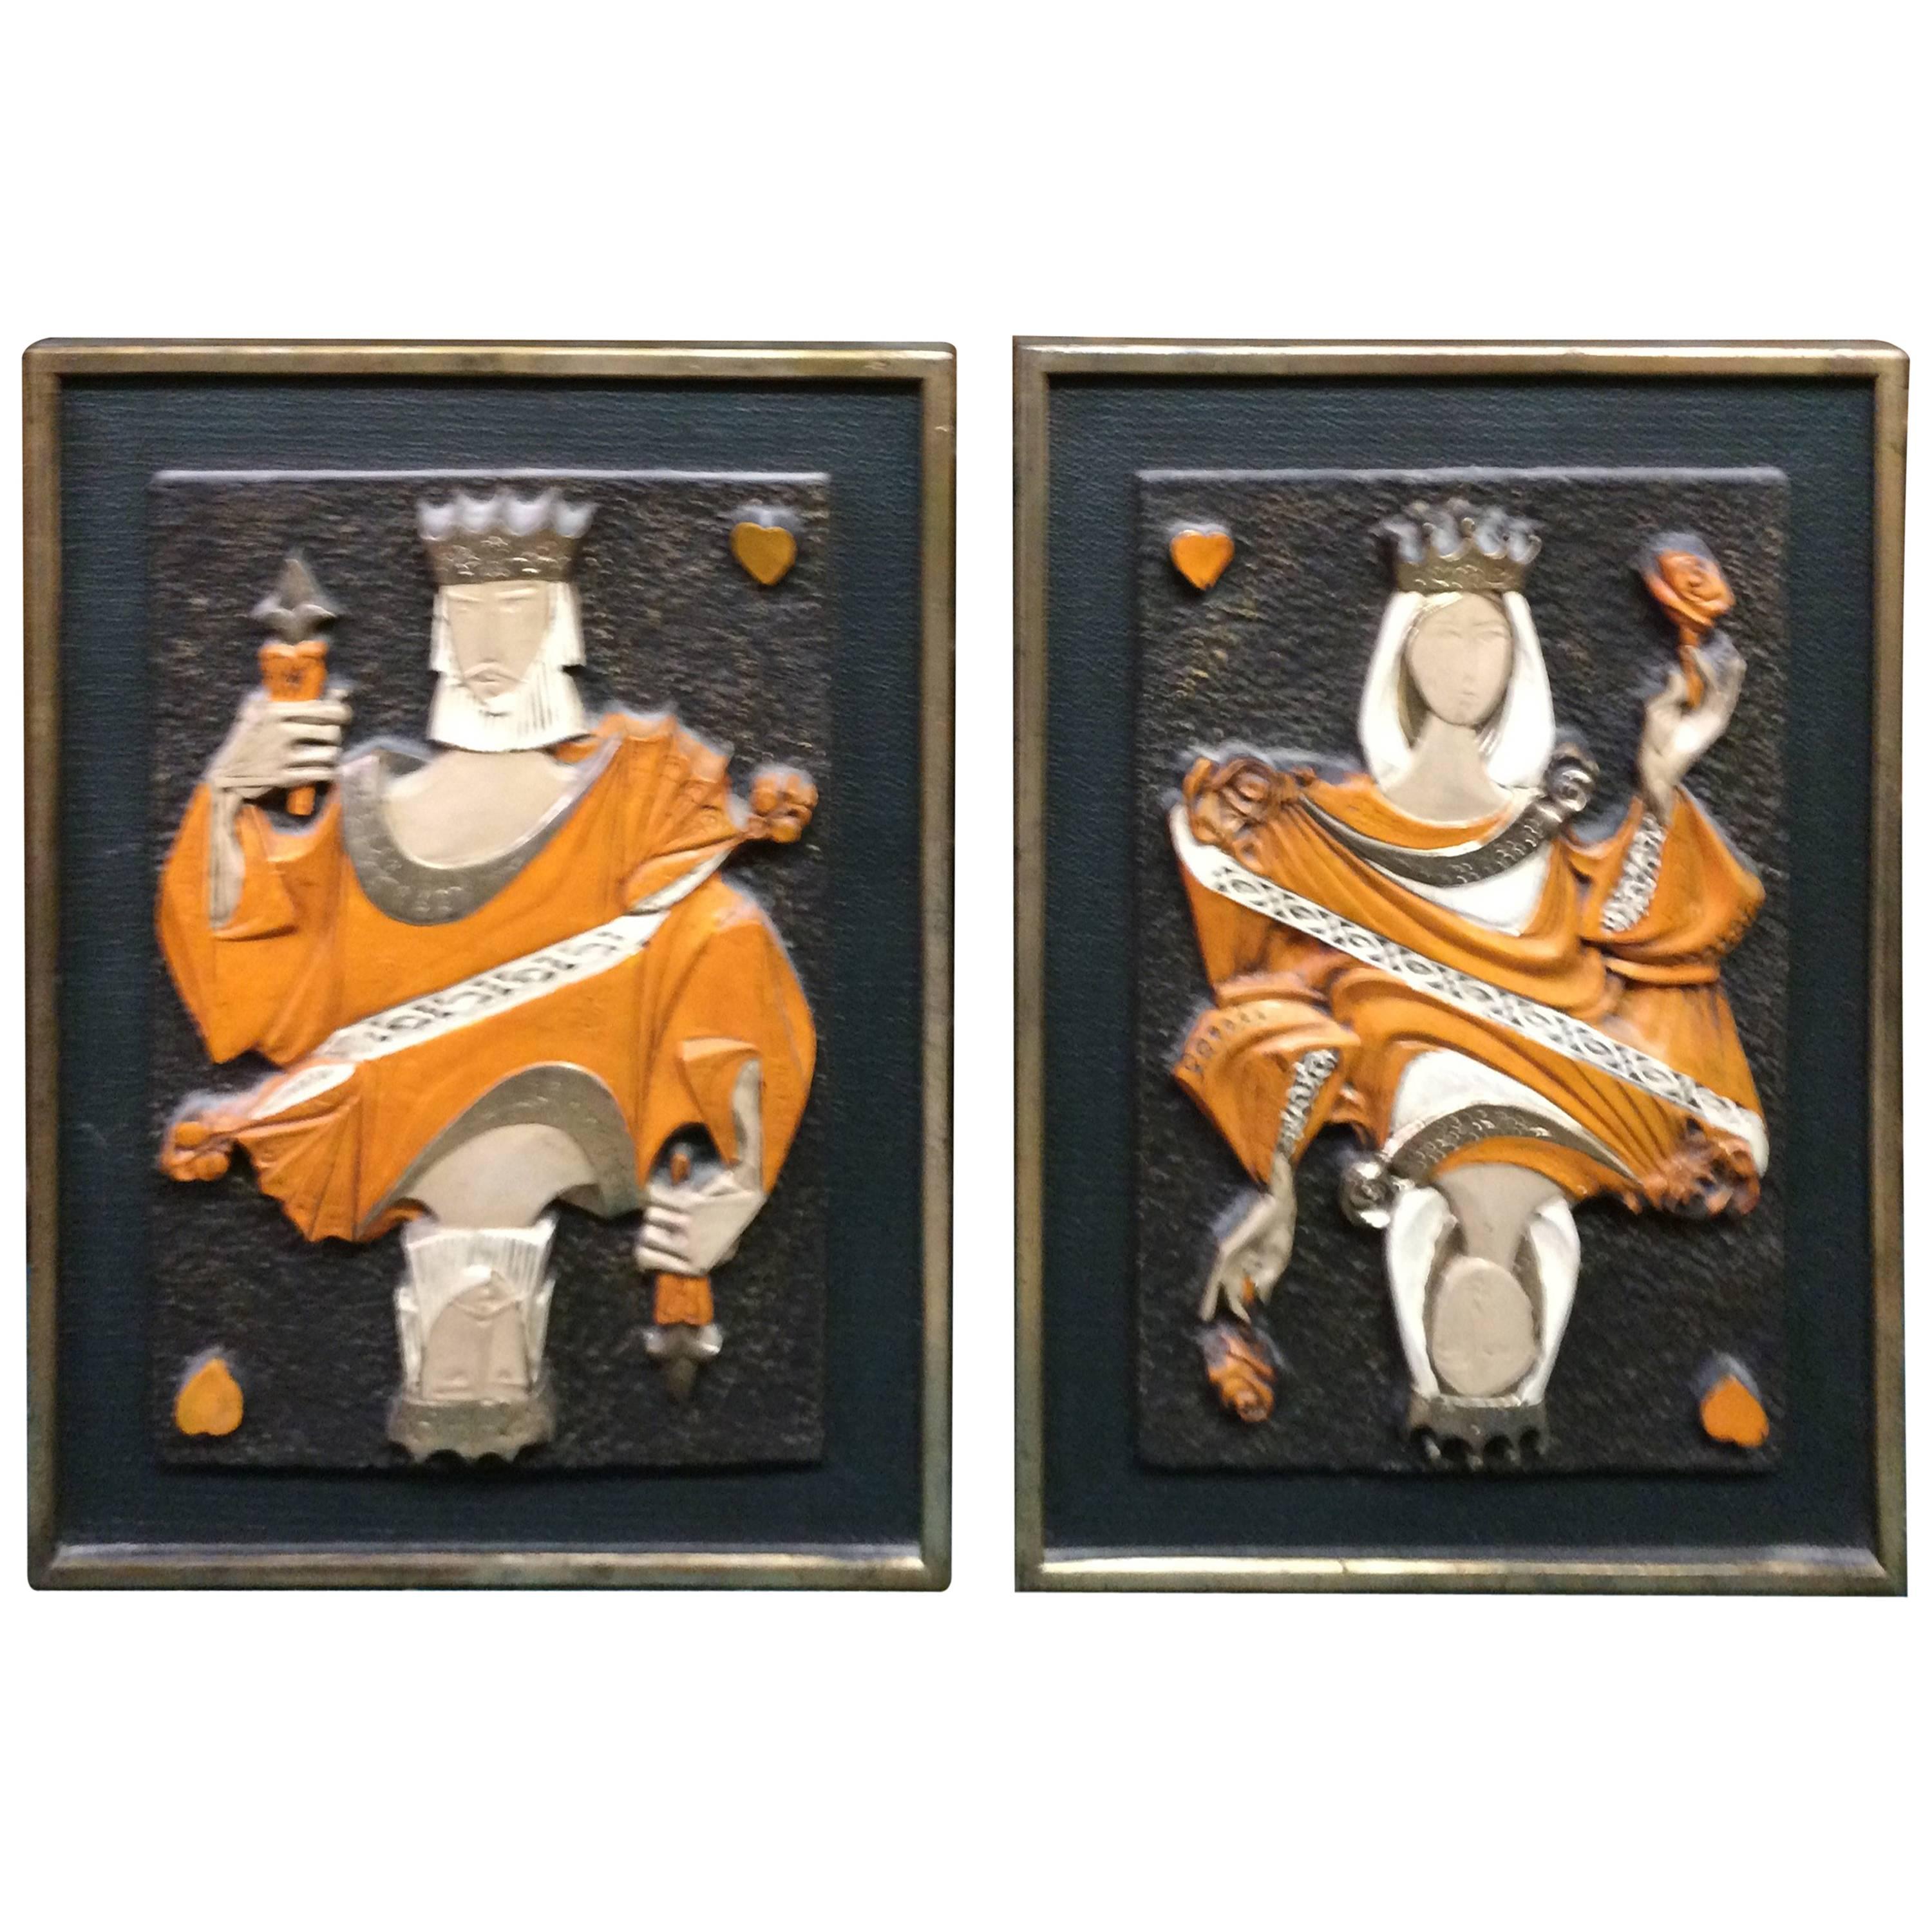 Mid-Century Modern Pair of King and Queen of Hearts Panels. Made of fiberglass resin these highly stylized and detailed panels are decorative and fun. Perfect for any card shark or gambler or just someone with a cool Mid Century Bar or office